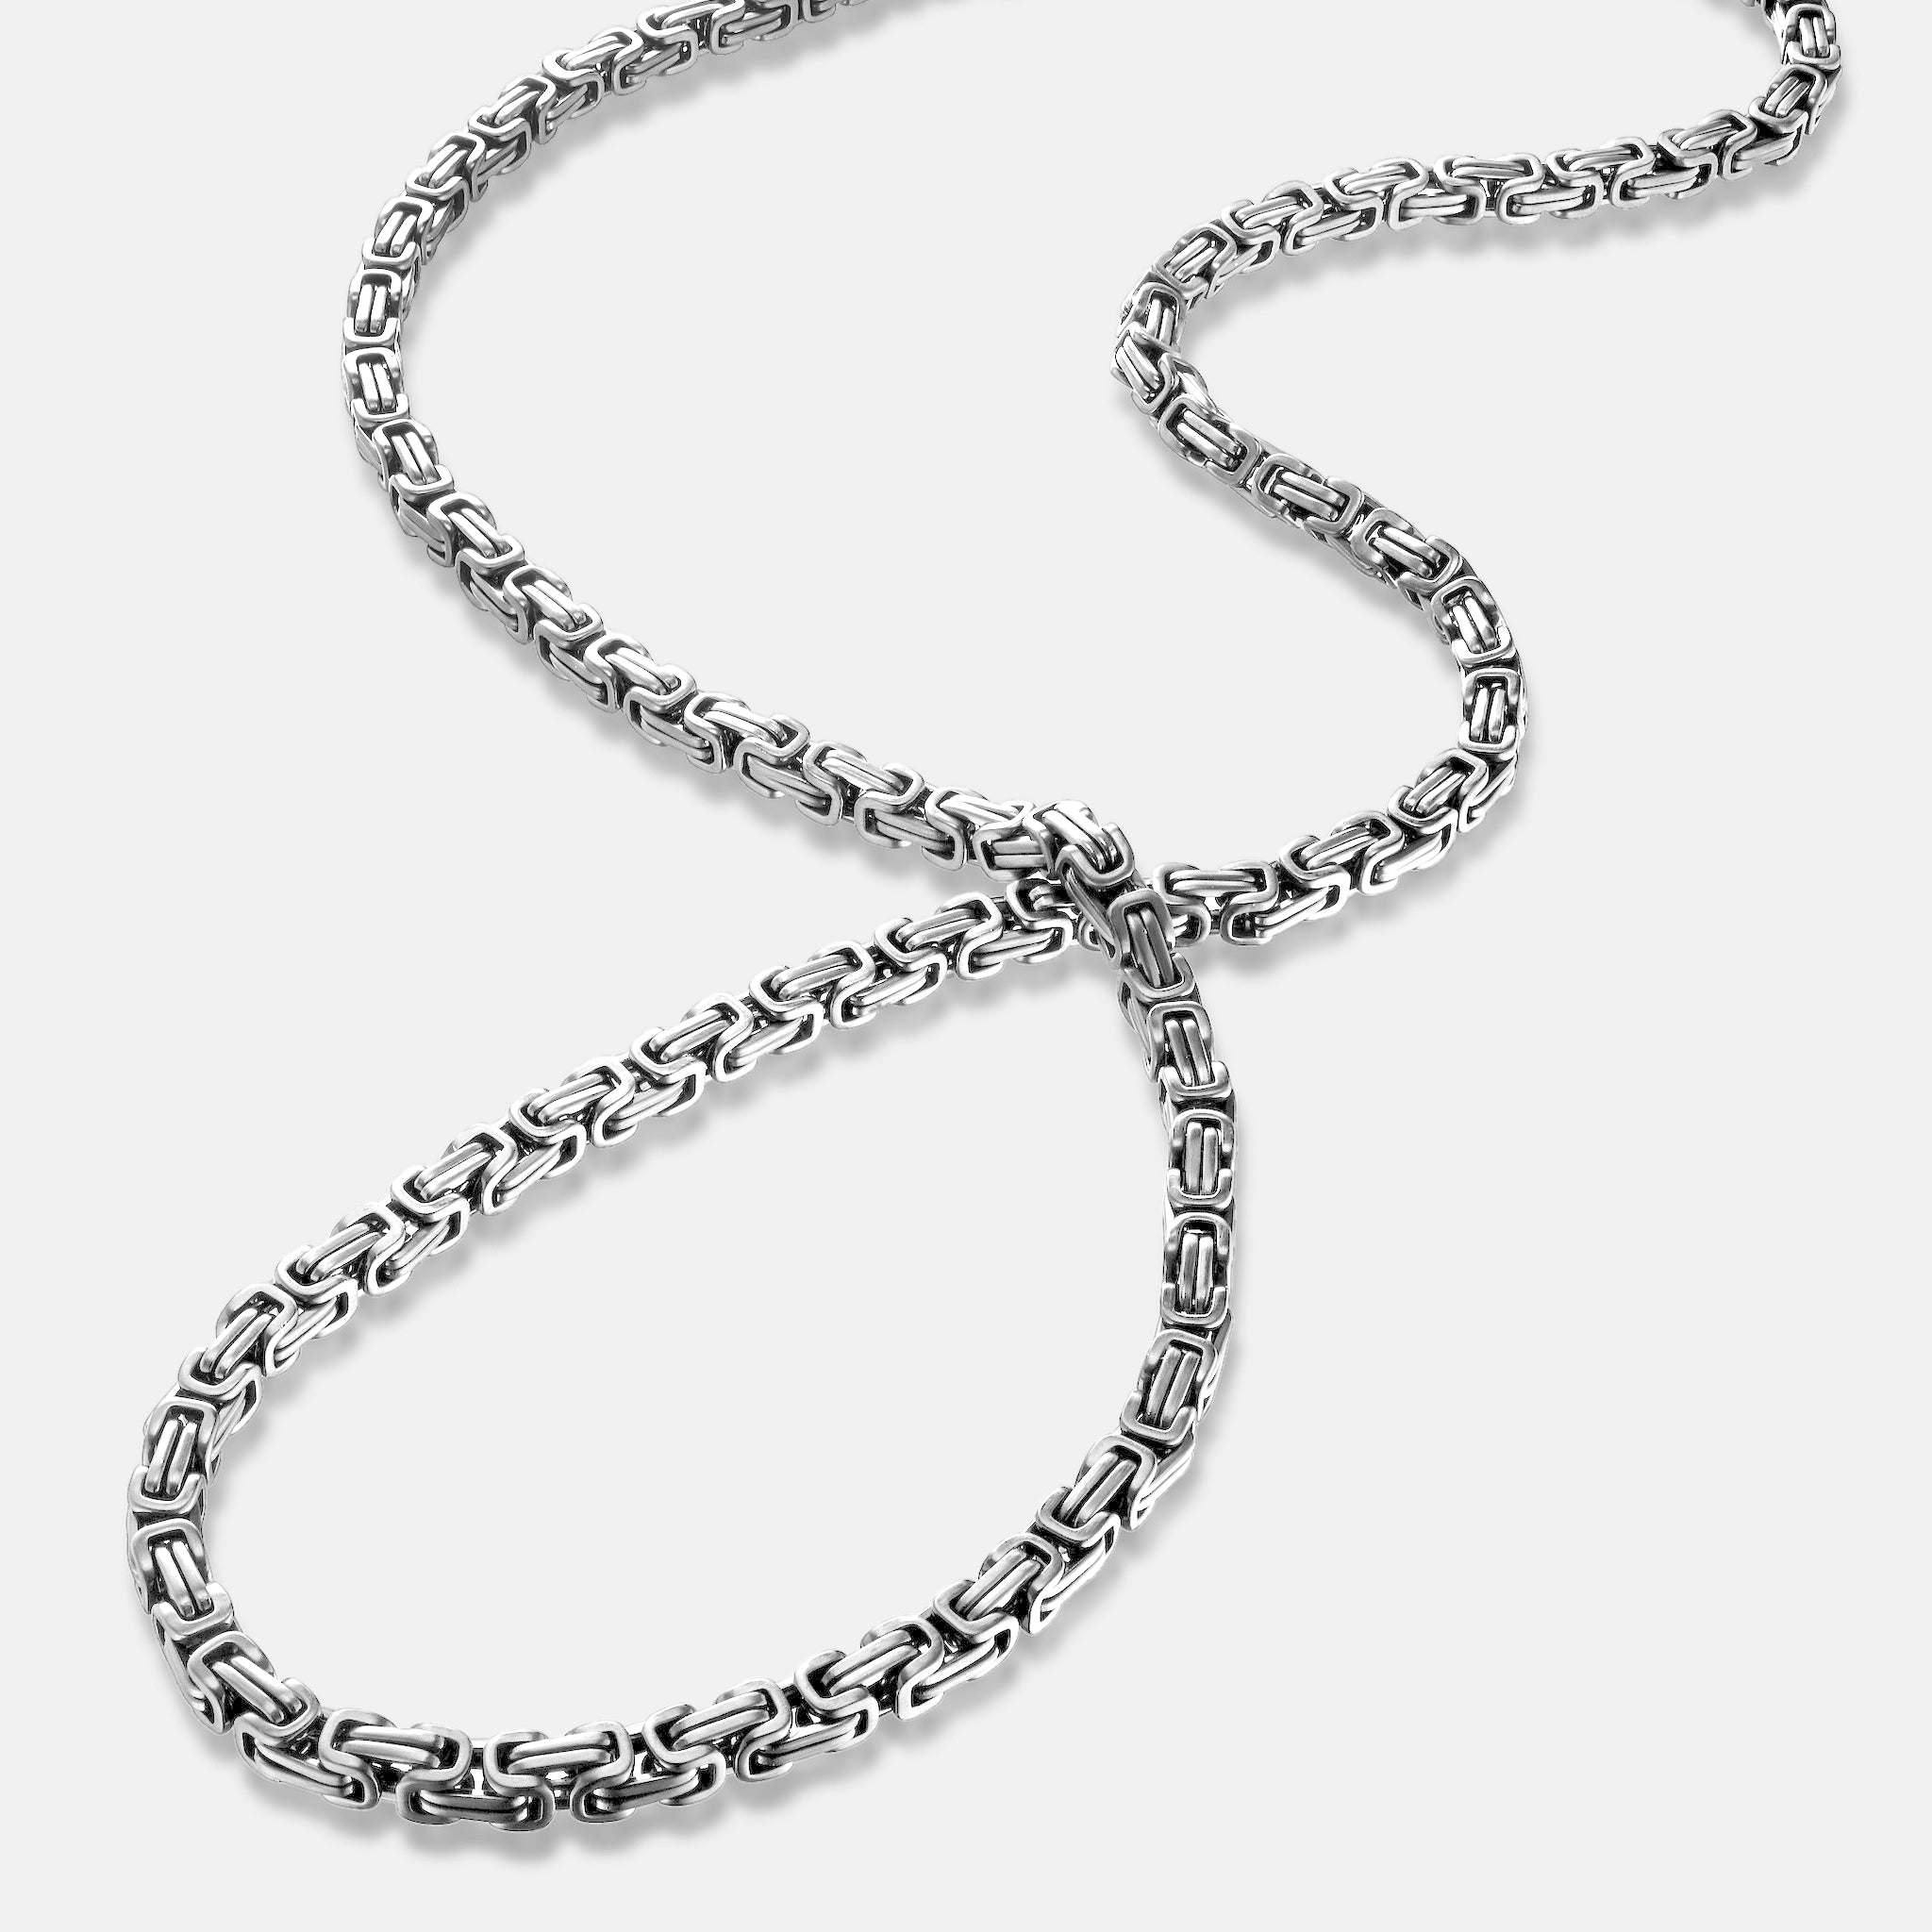 K12 - SILVER KING CHAIN - 4.2MM